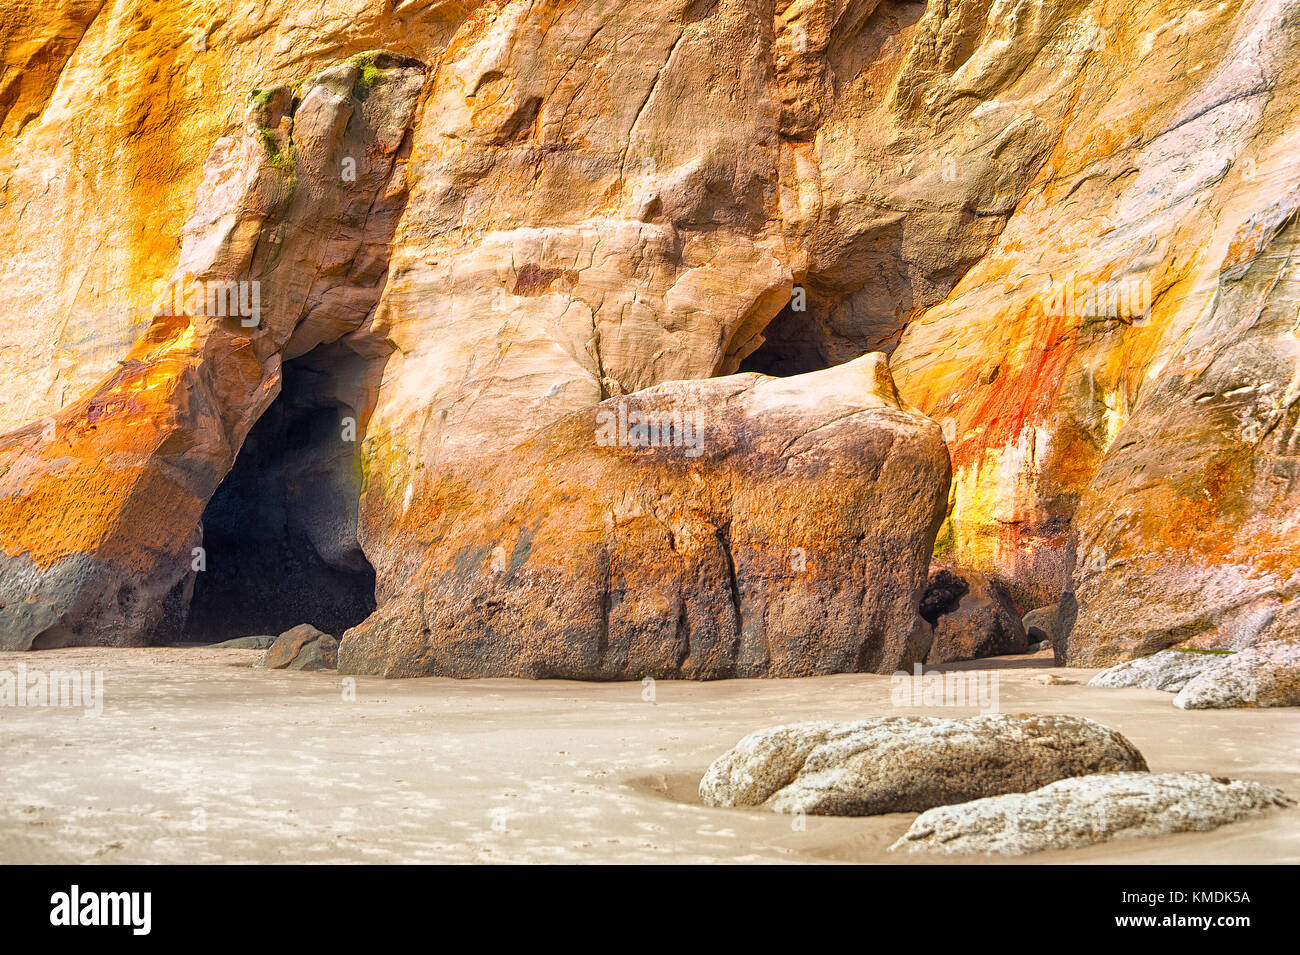 Carved by the returning tides of the Pacific Ocean, these geological sandstone features at Cape Kiwanda in Pacific City on the Oregon Coast are a grea Stock Photo